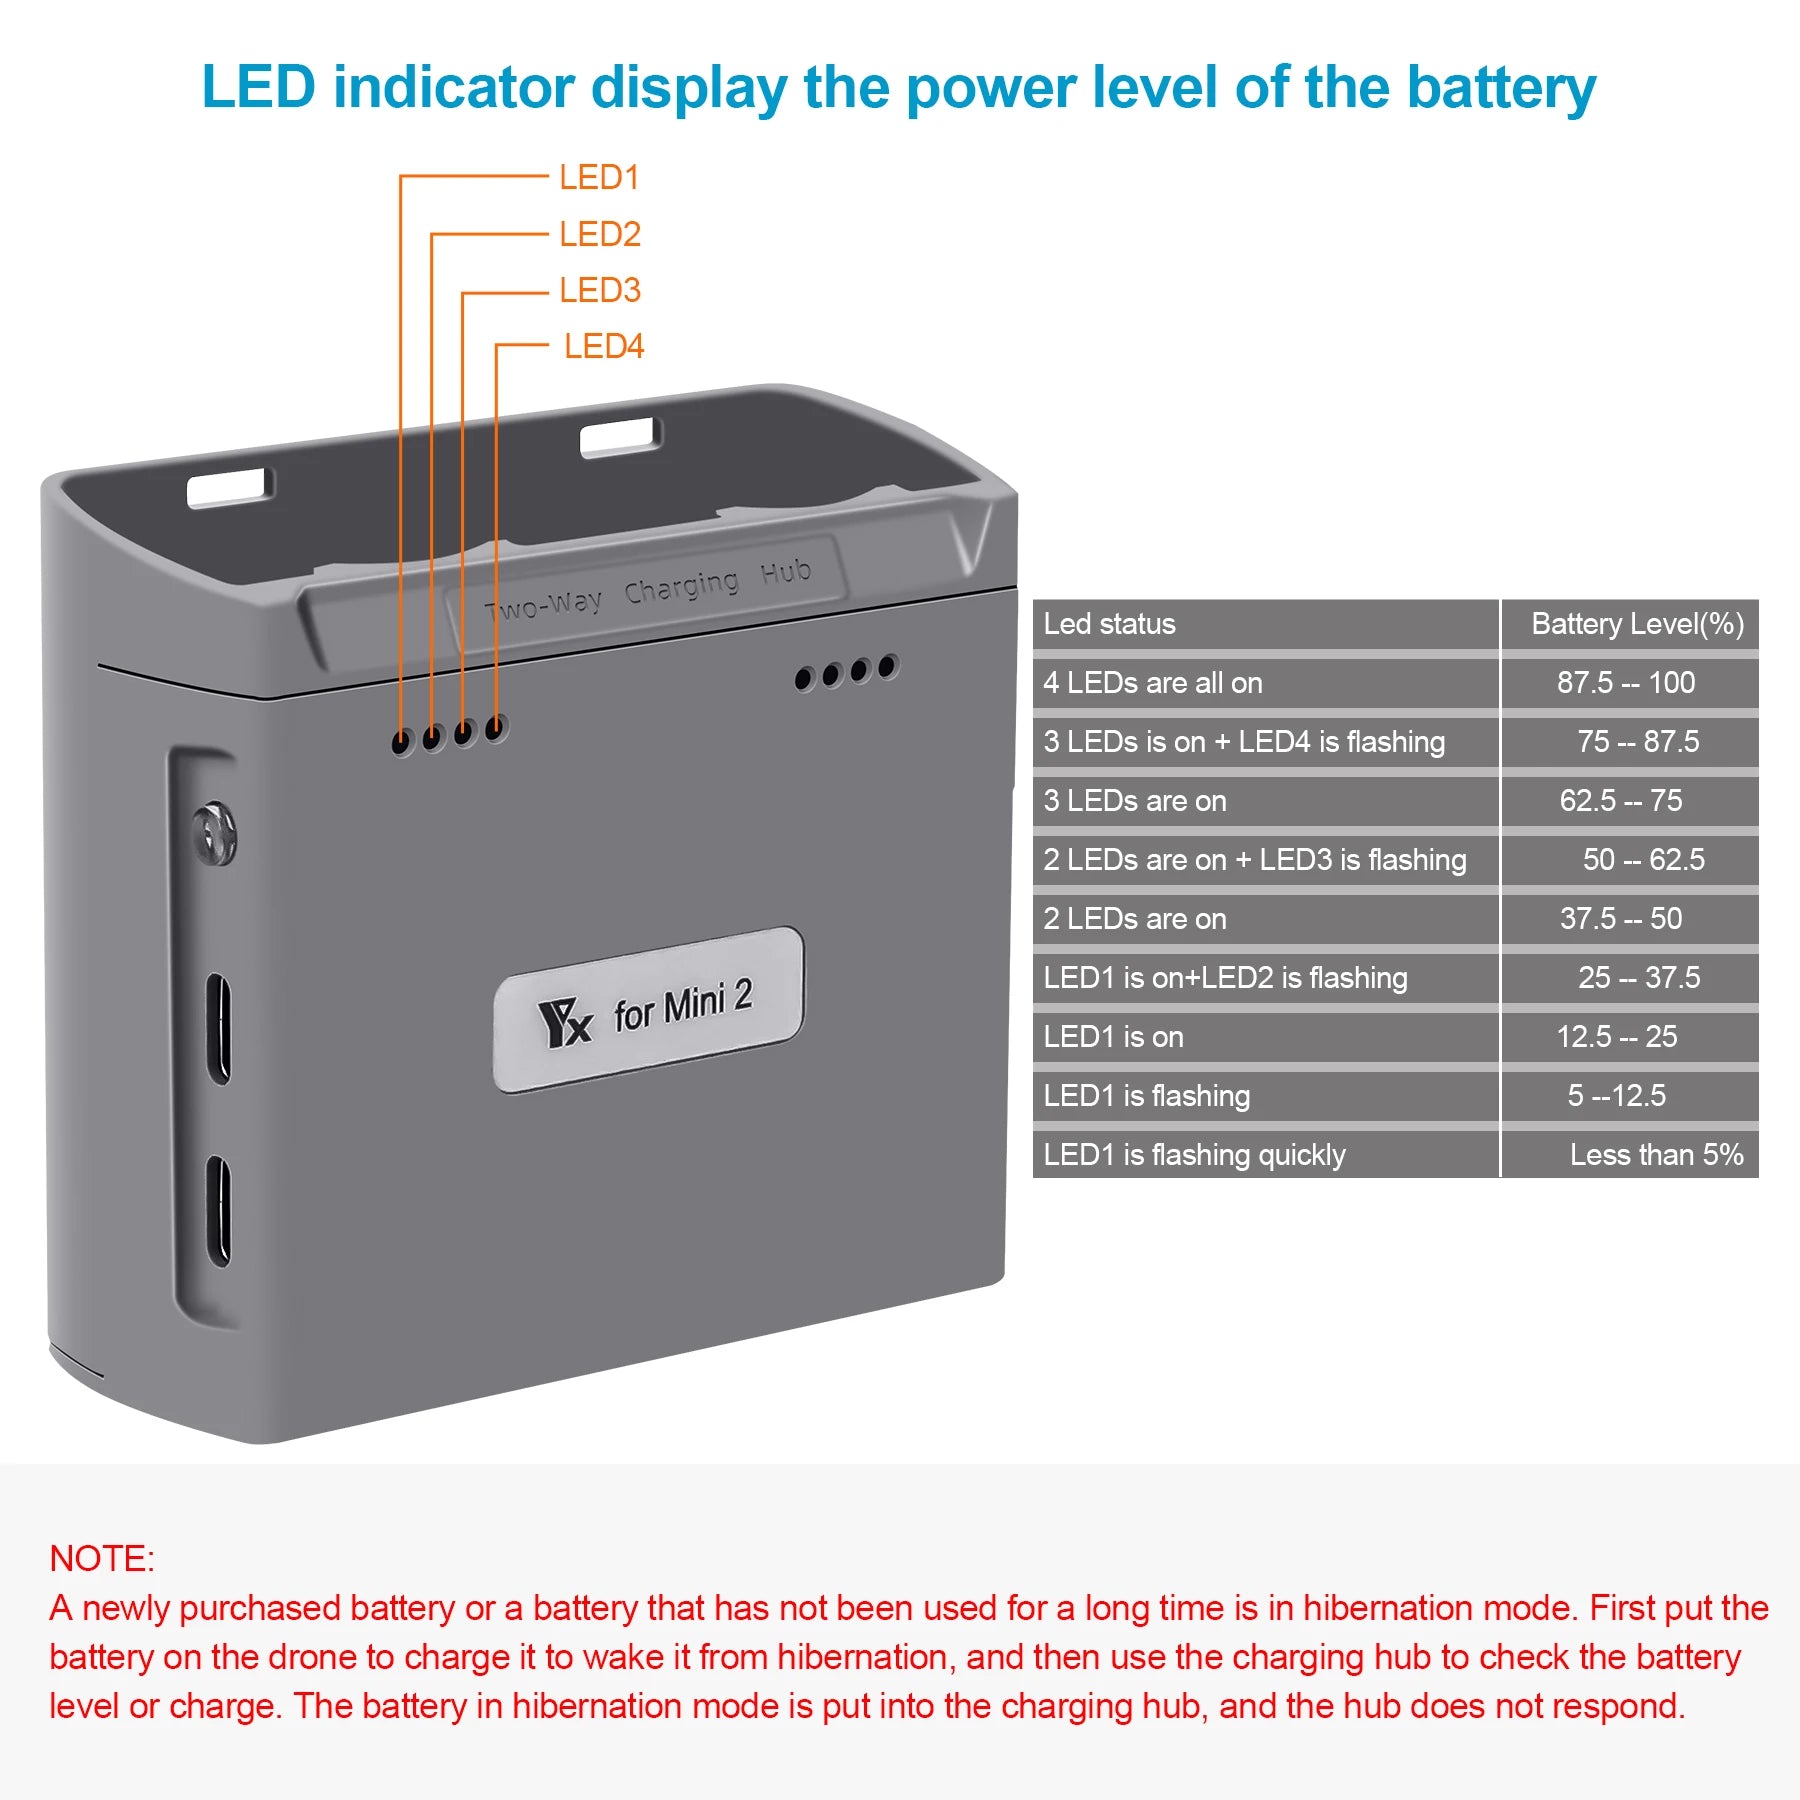 a newly purcharsed battery or a battery has not been used for a long